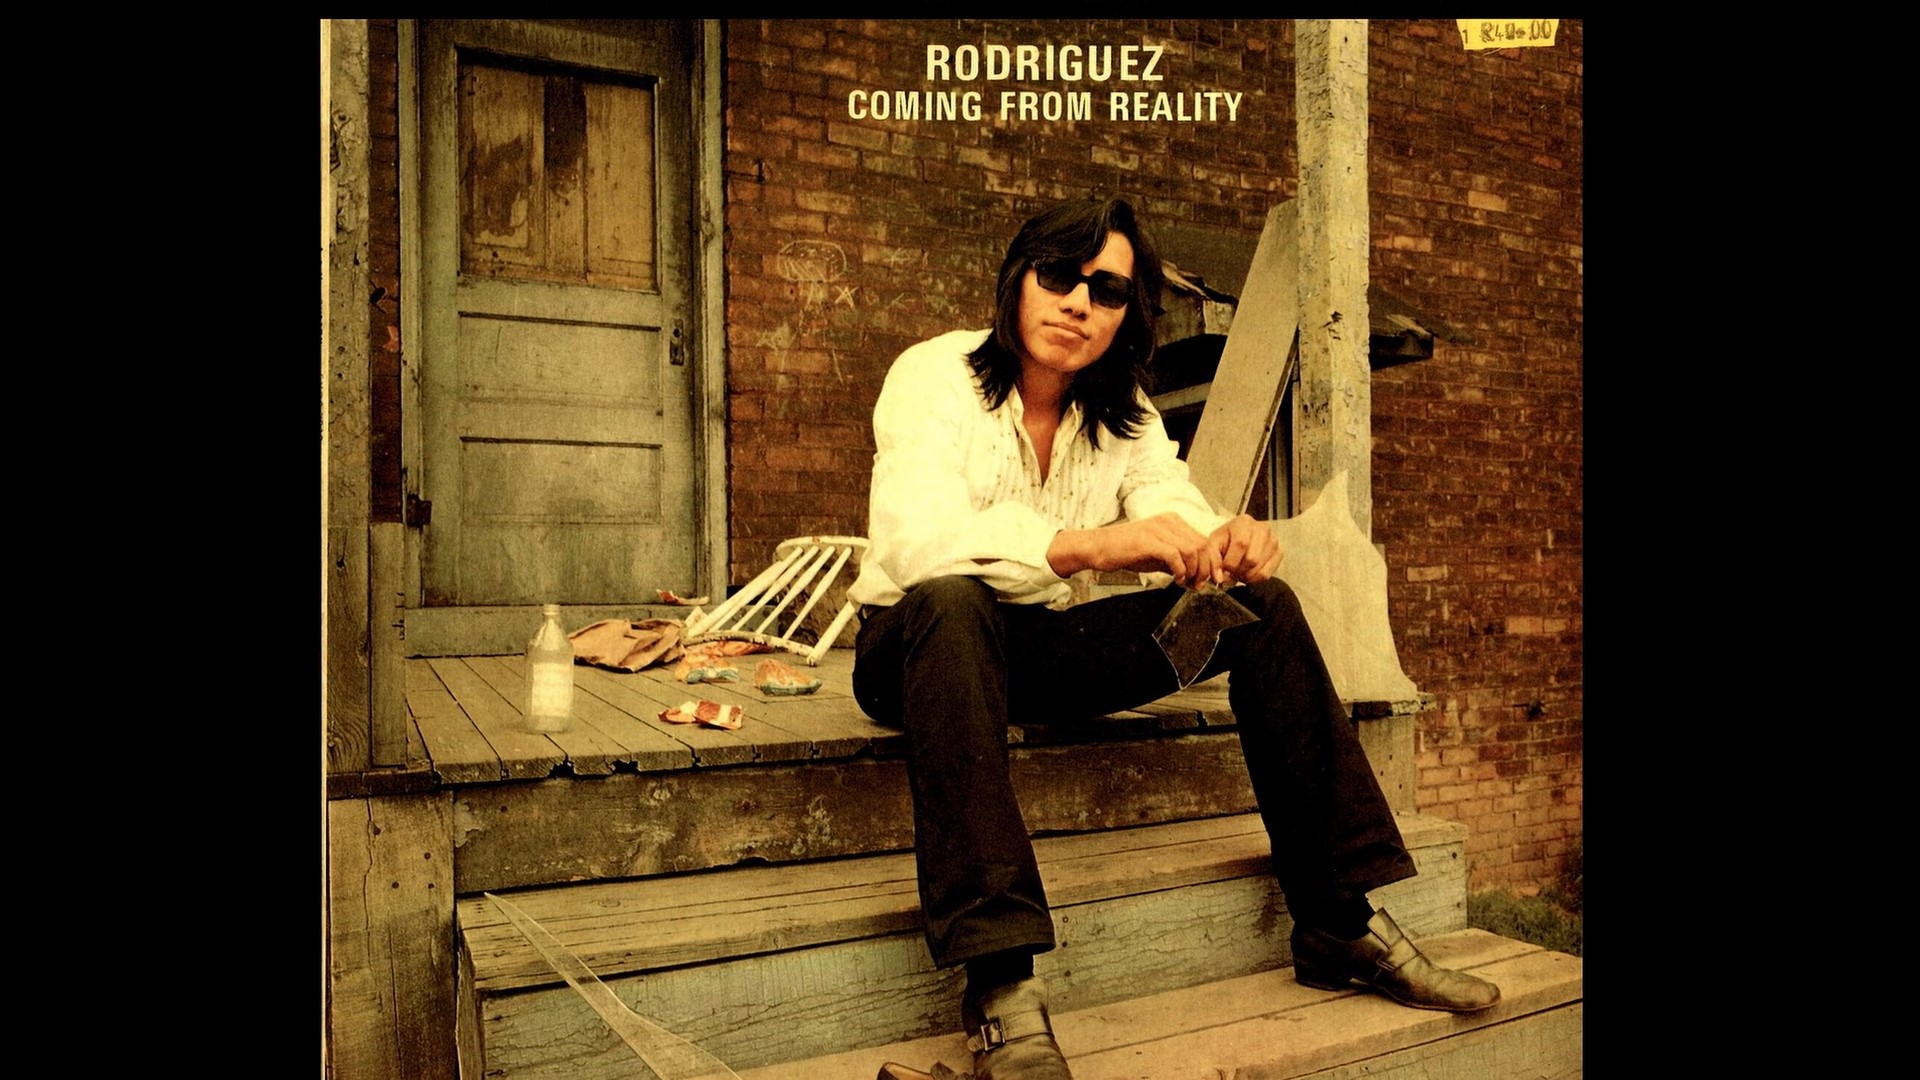 Rodriguez (Source - movie Searching For Sugar man)